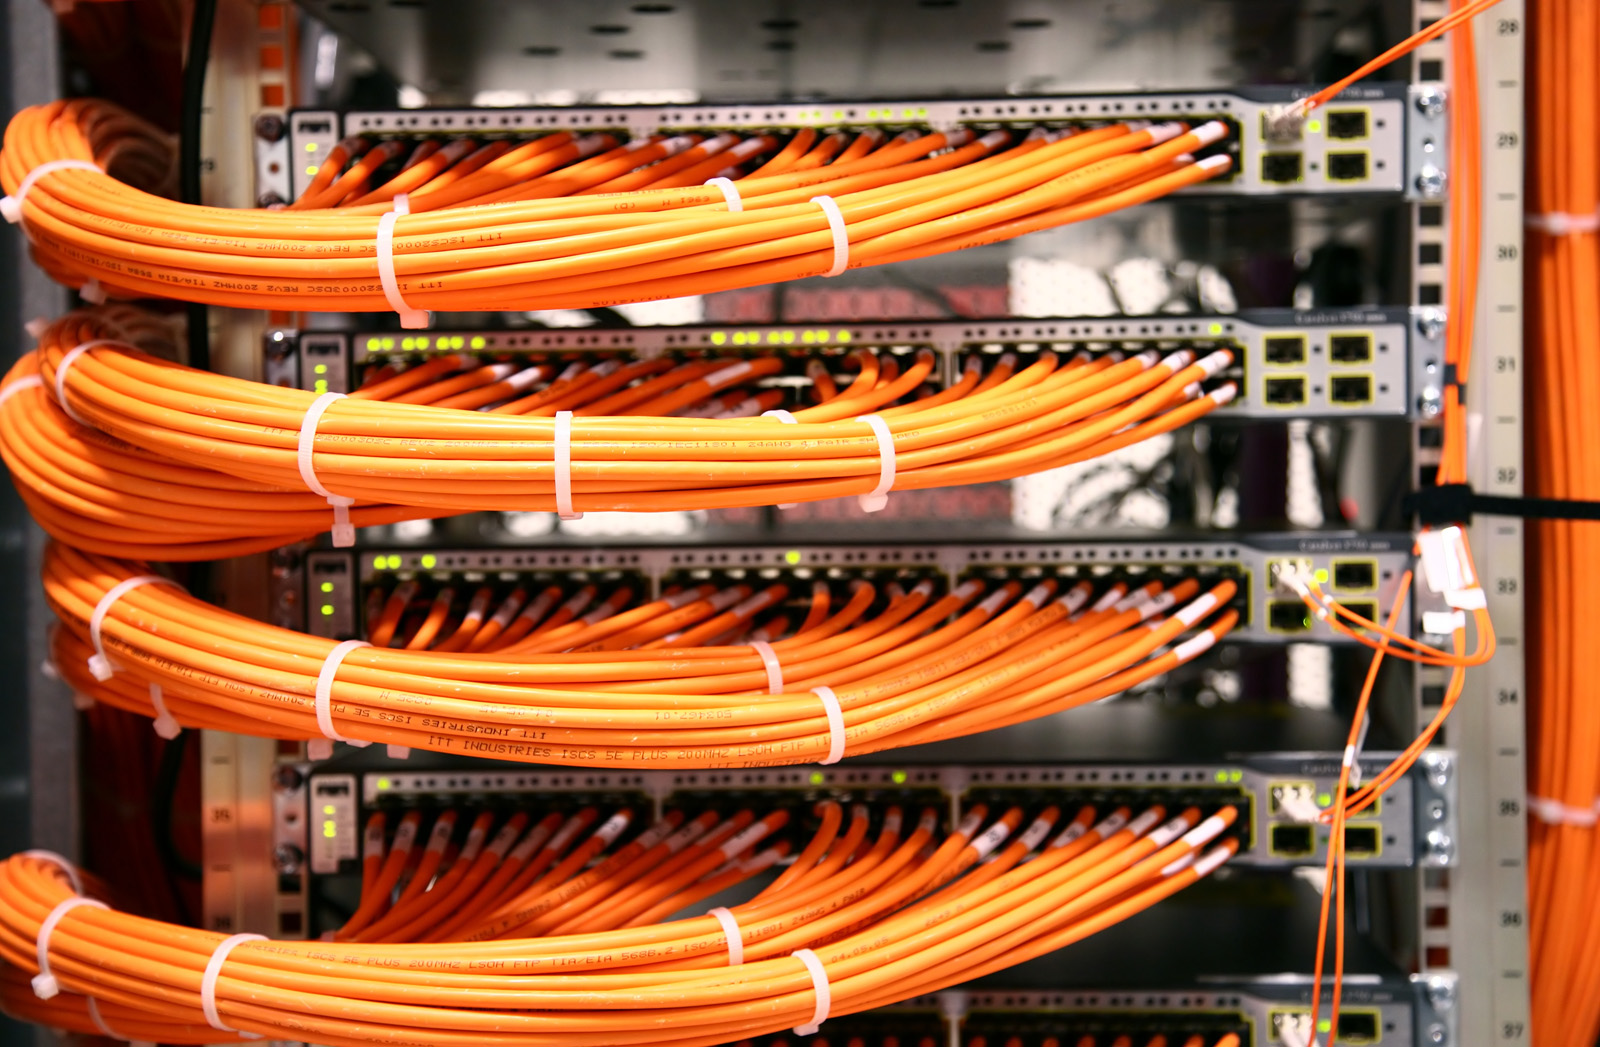 Gardendale AL Trusted Voice & Data Network Cabling Services Provider